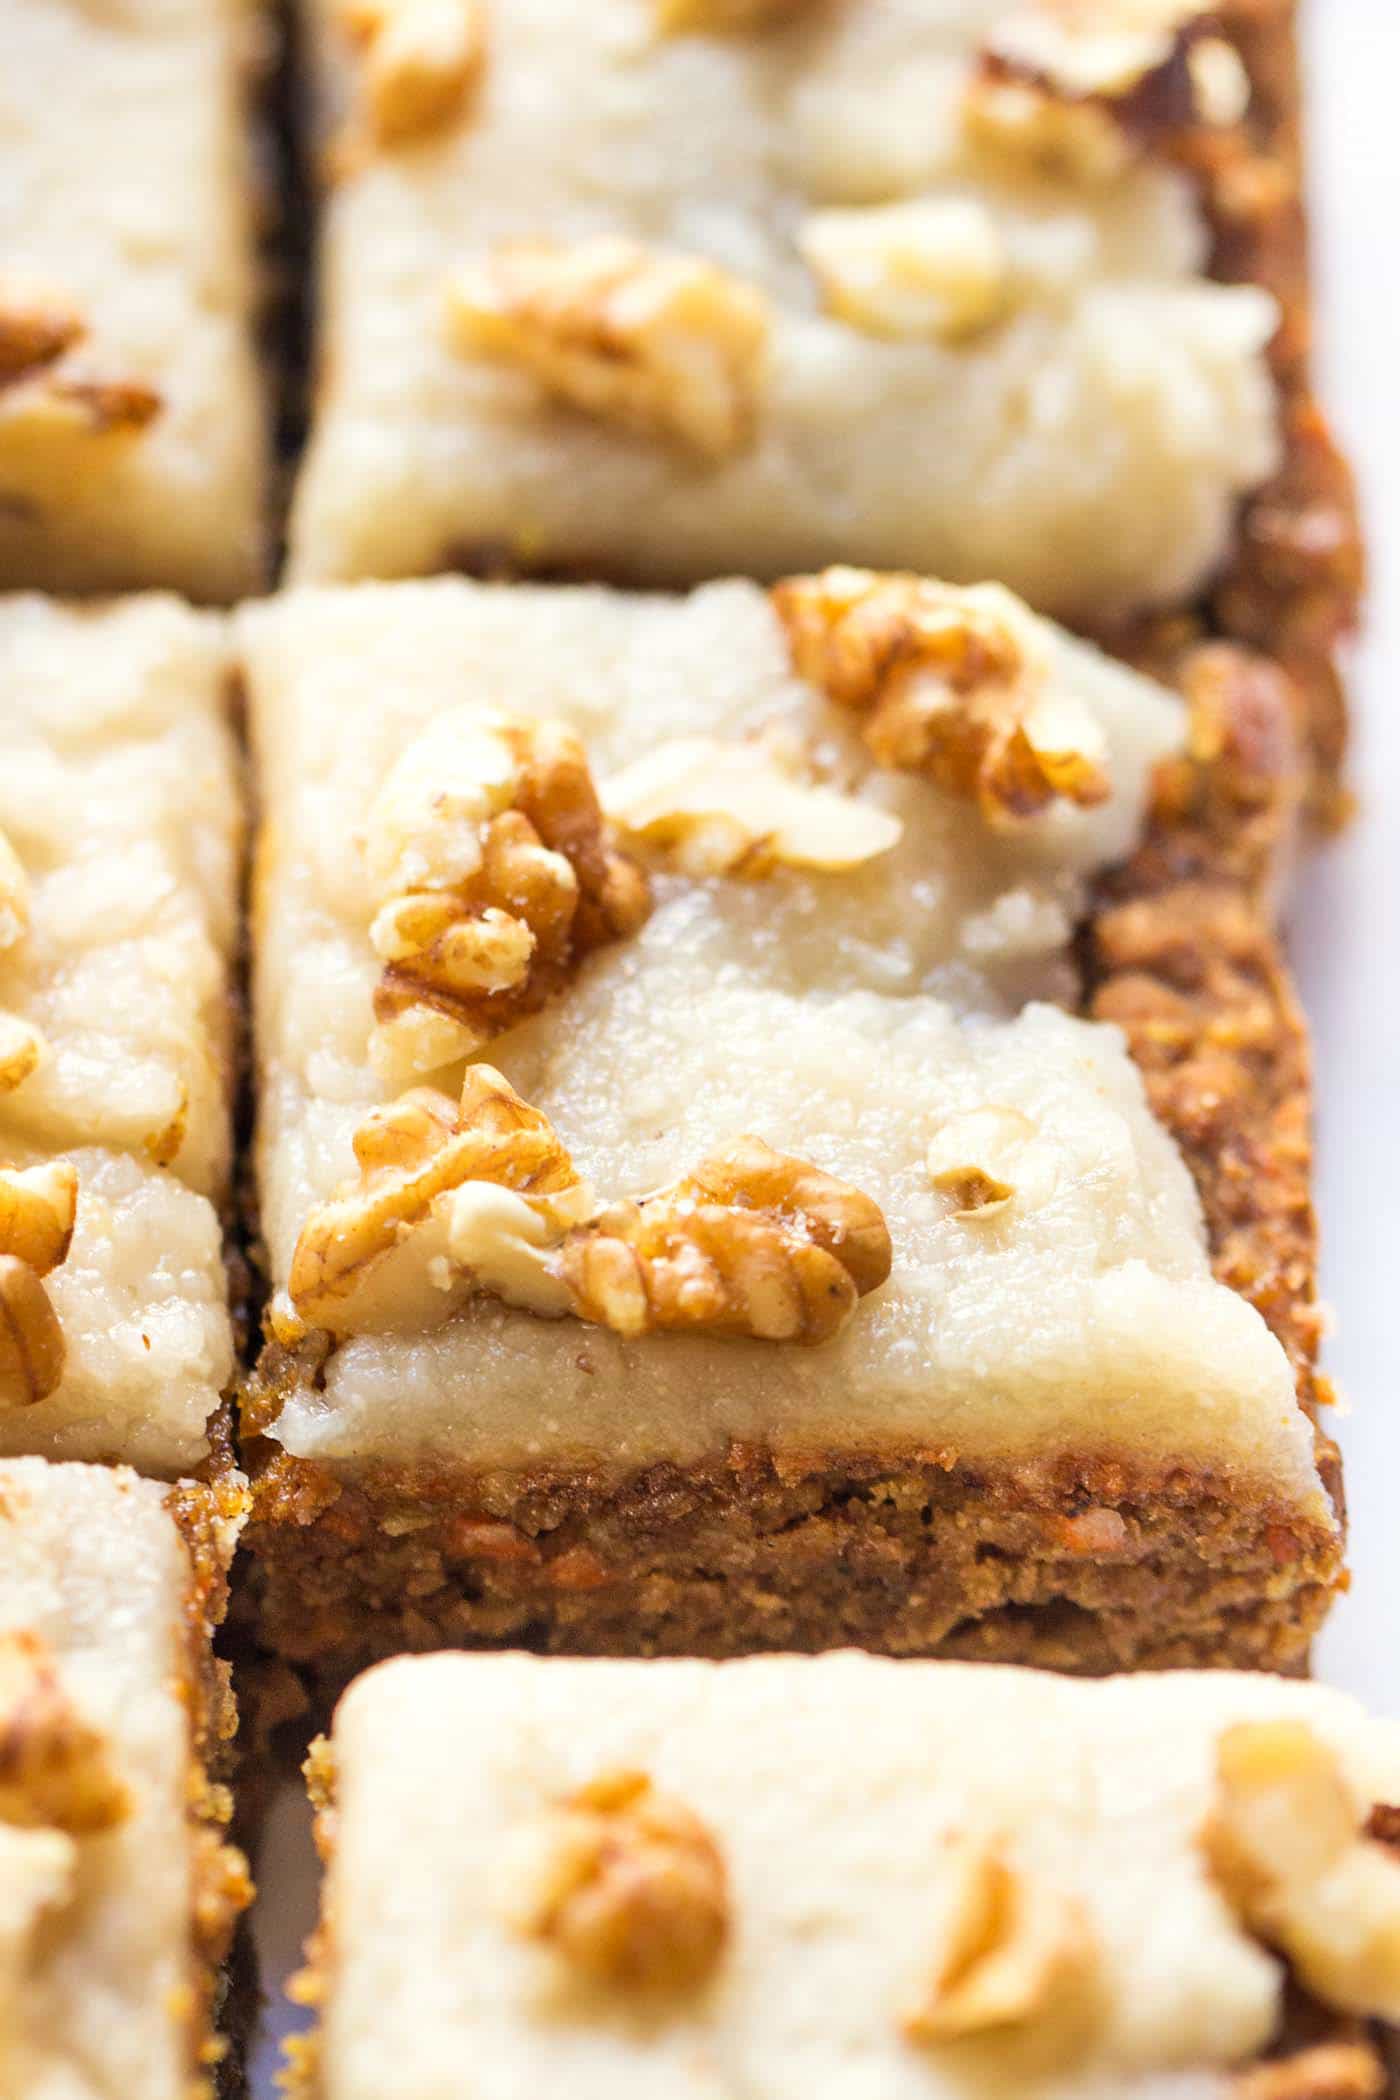 The secret to making this vegan carrot cake healthy? Using quinoa and chickpeas!